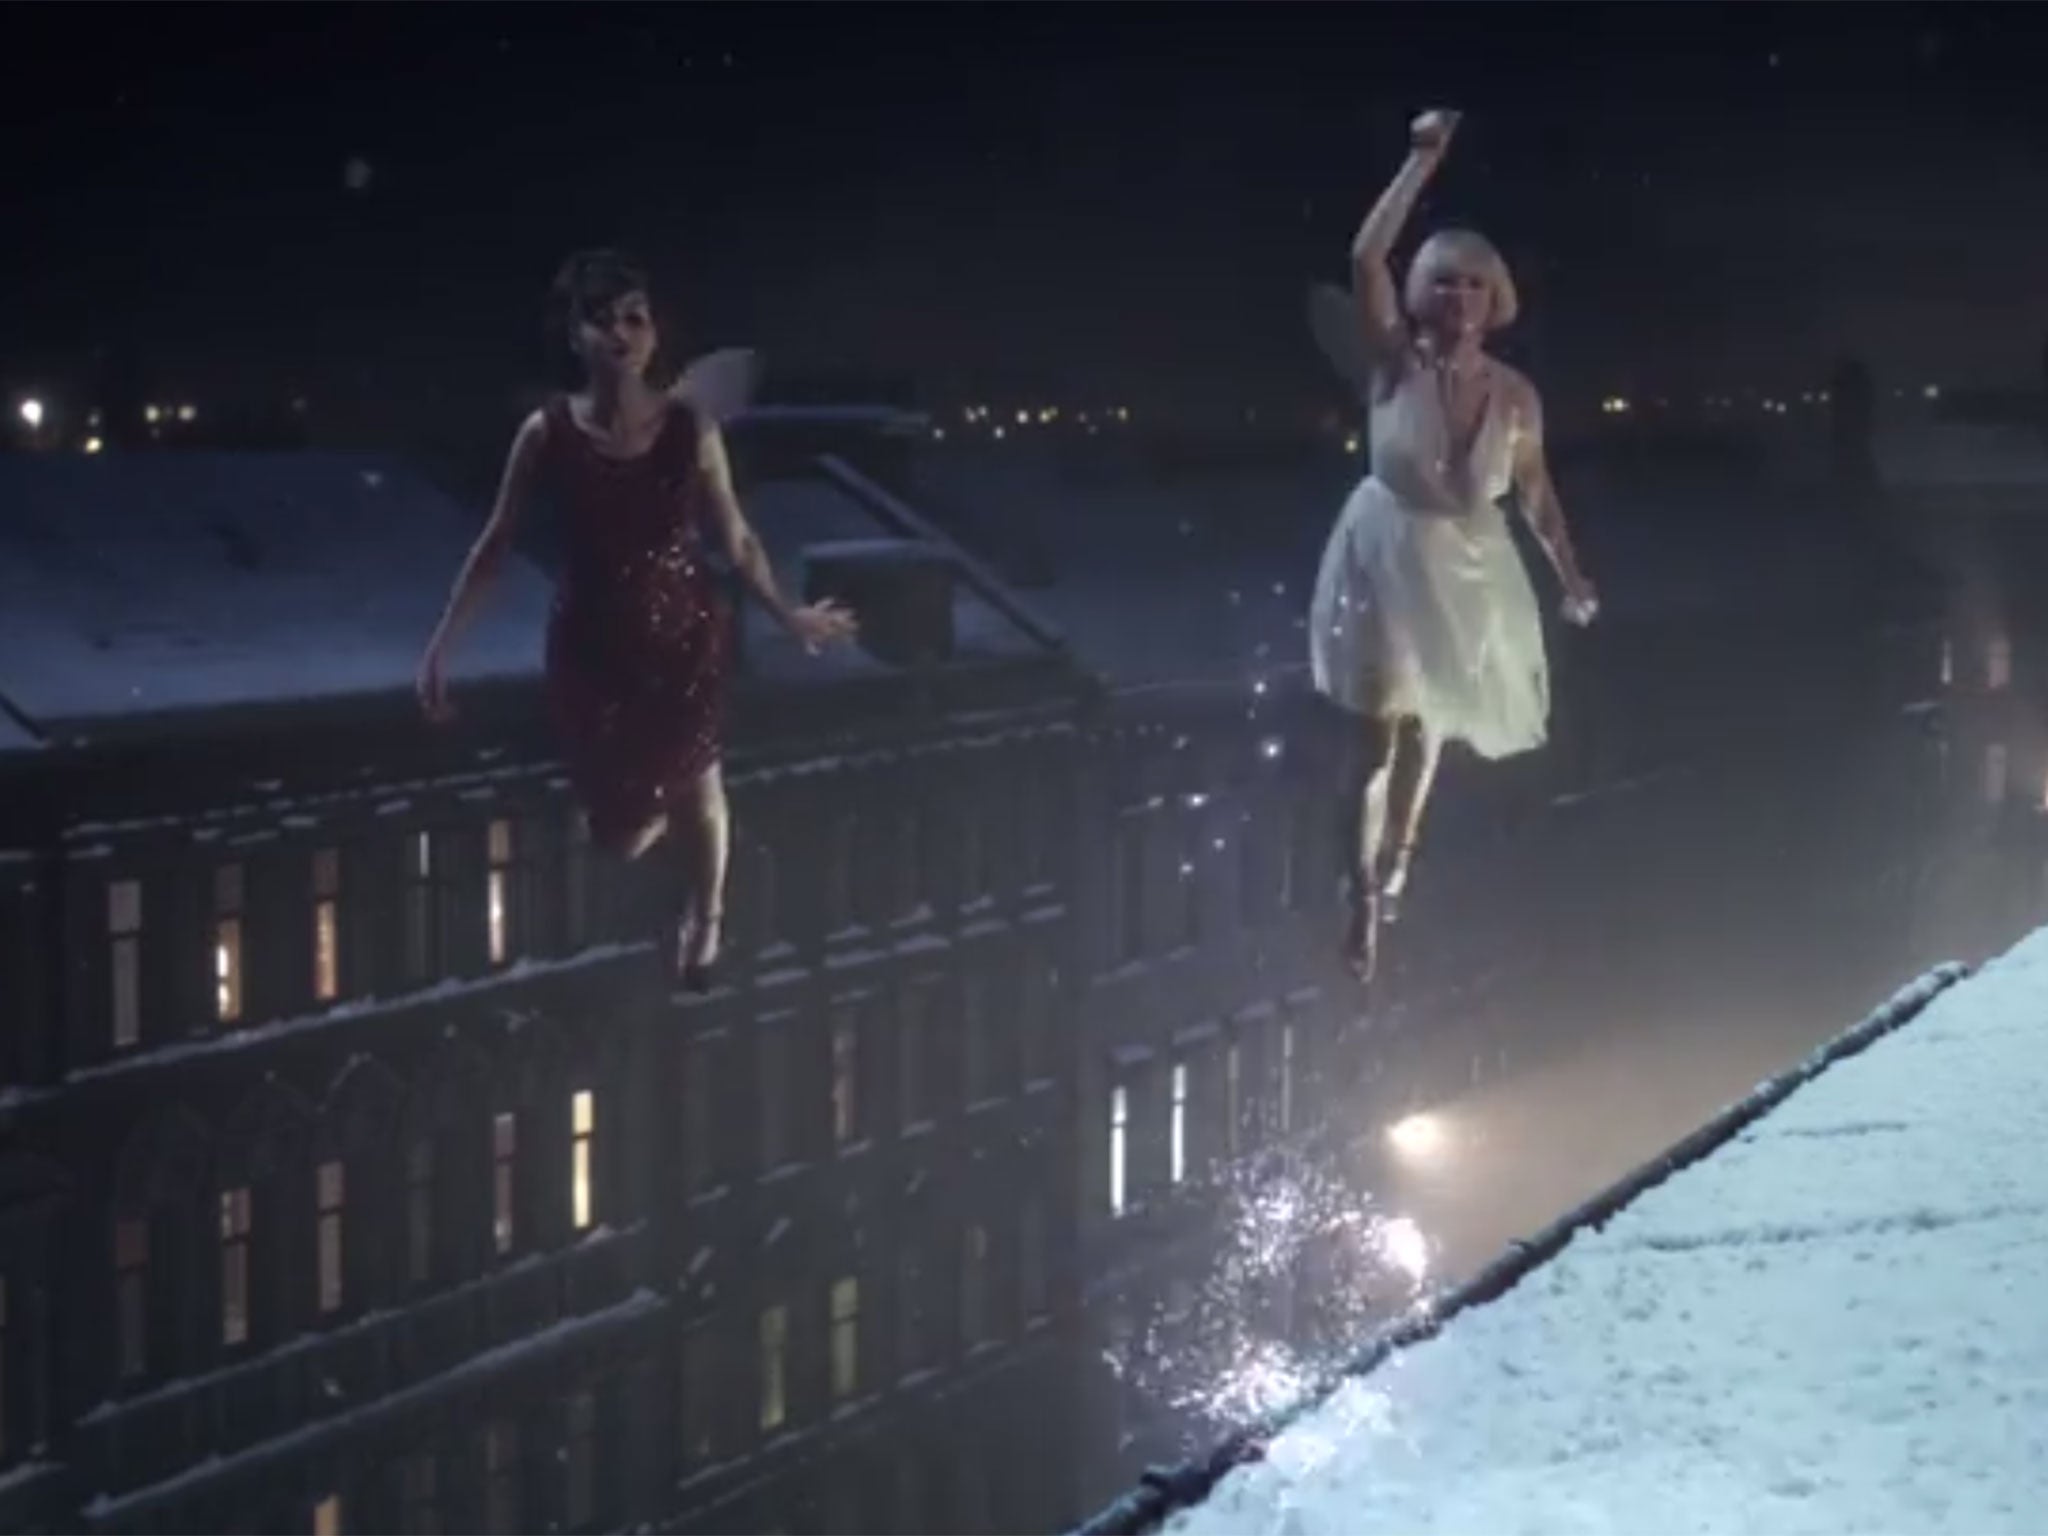 Magic and Sparkle bring Christmas cheer to the country in the Marks and Spencer Christmas ad